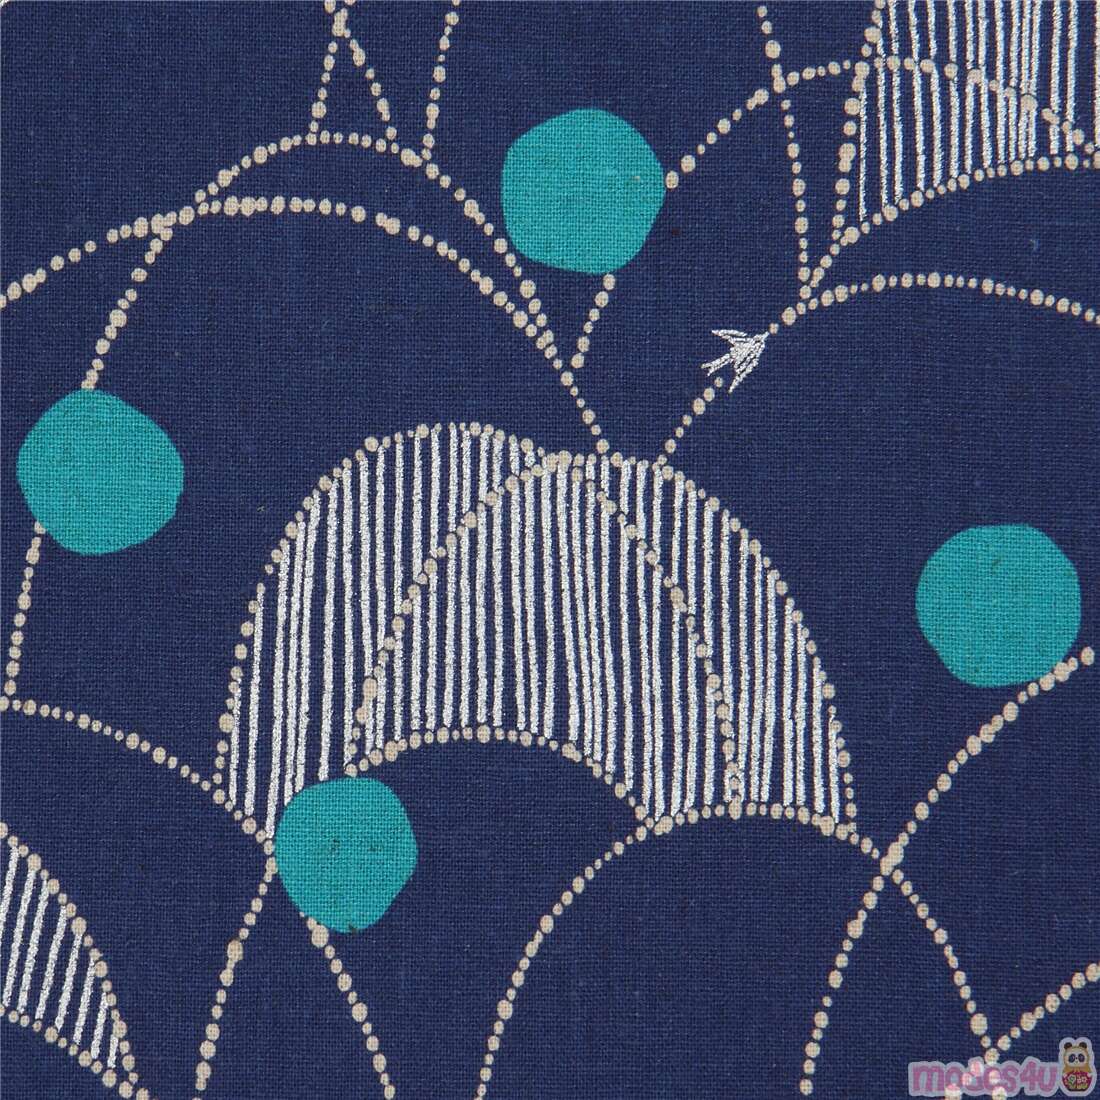 echino canvas laminate fabric with navy blue and metallic silver ...